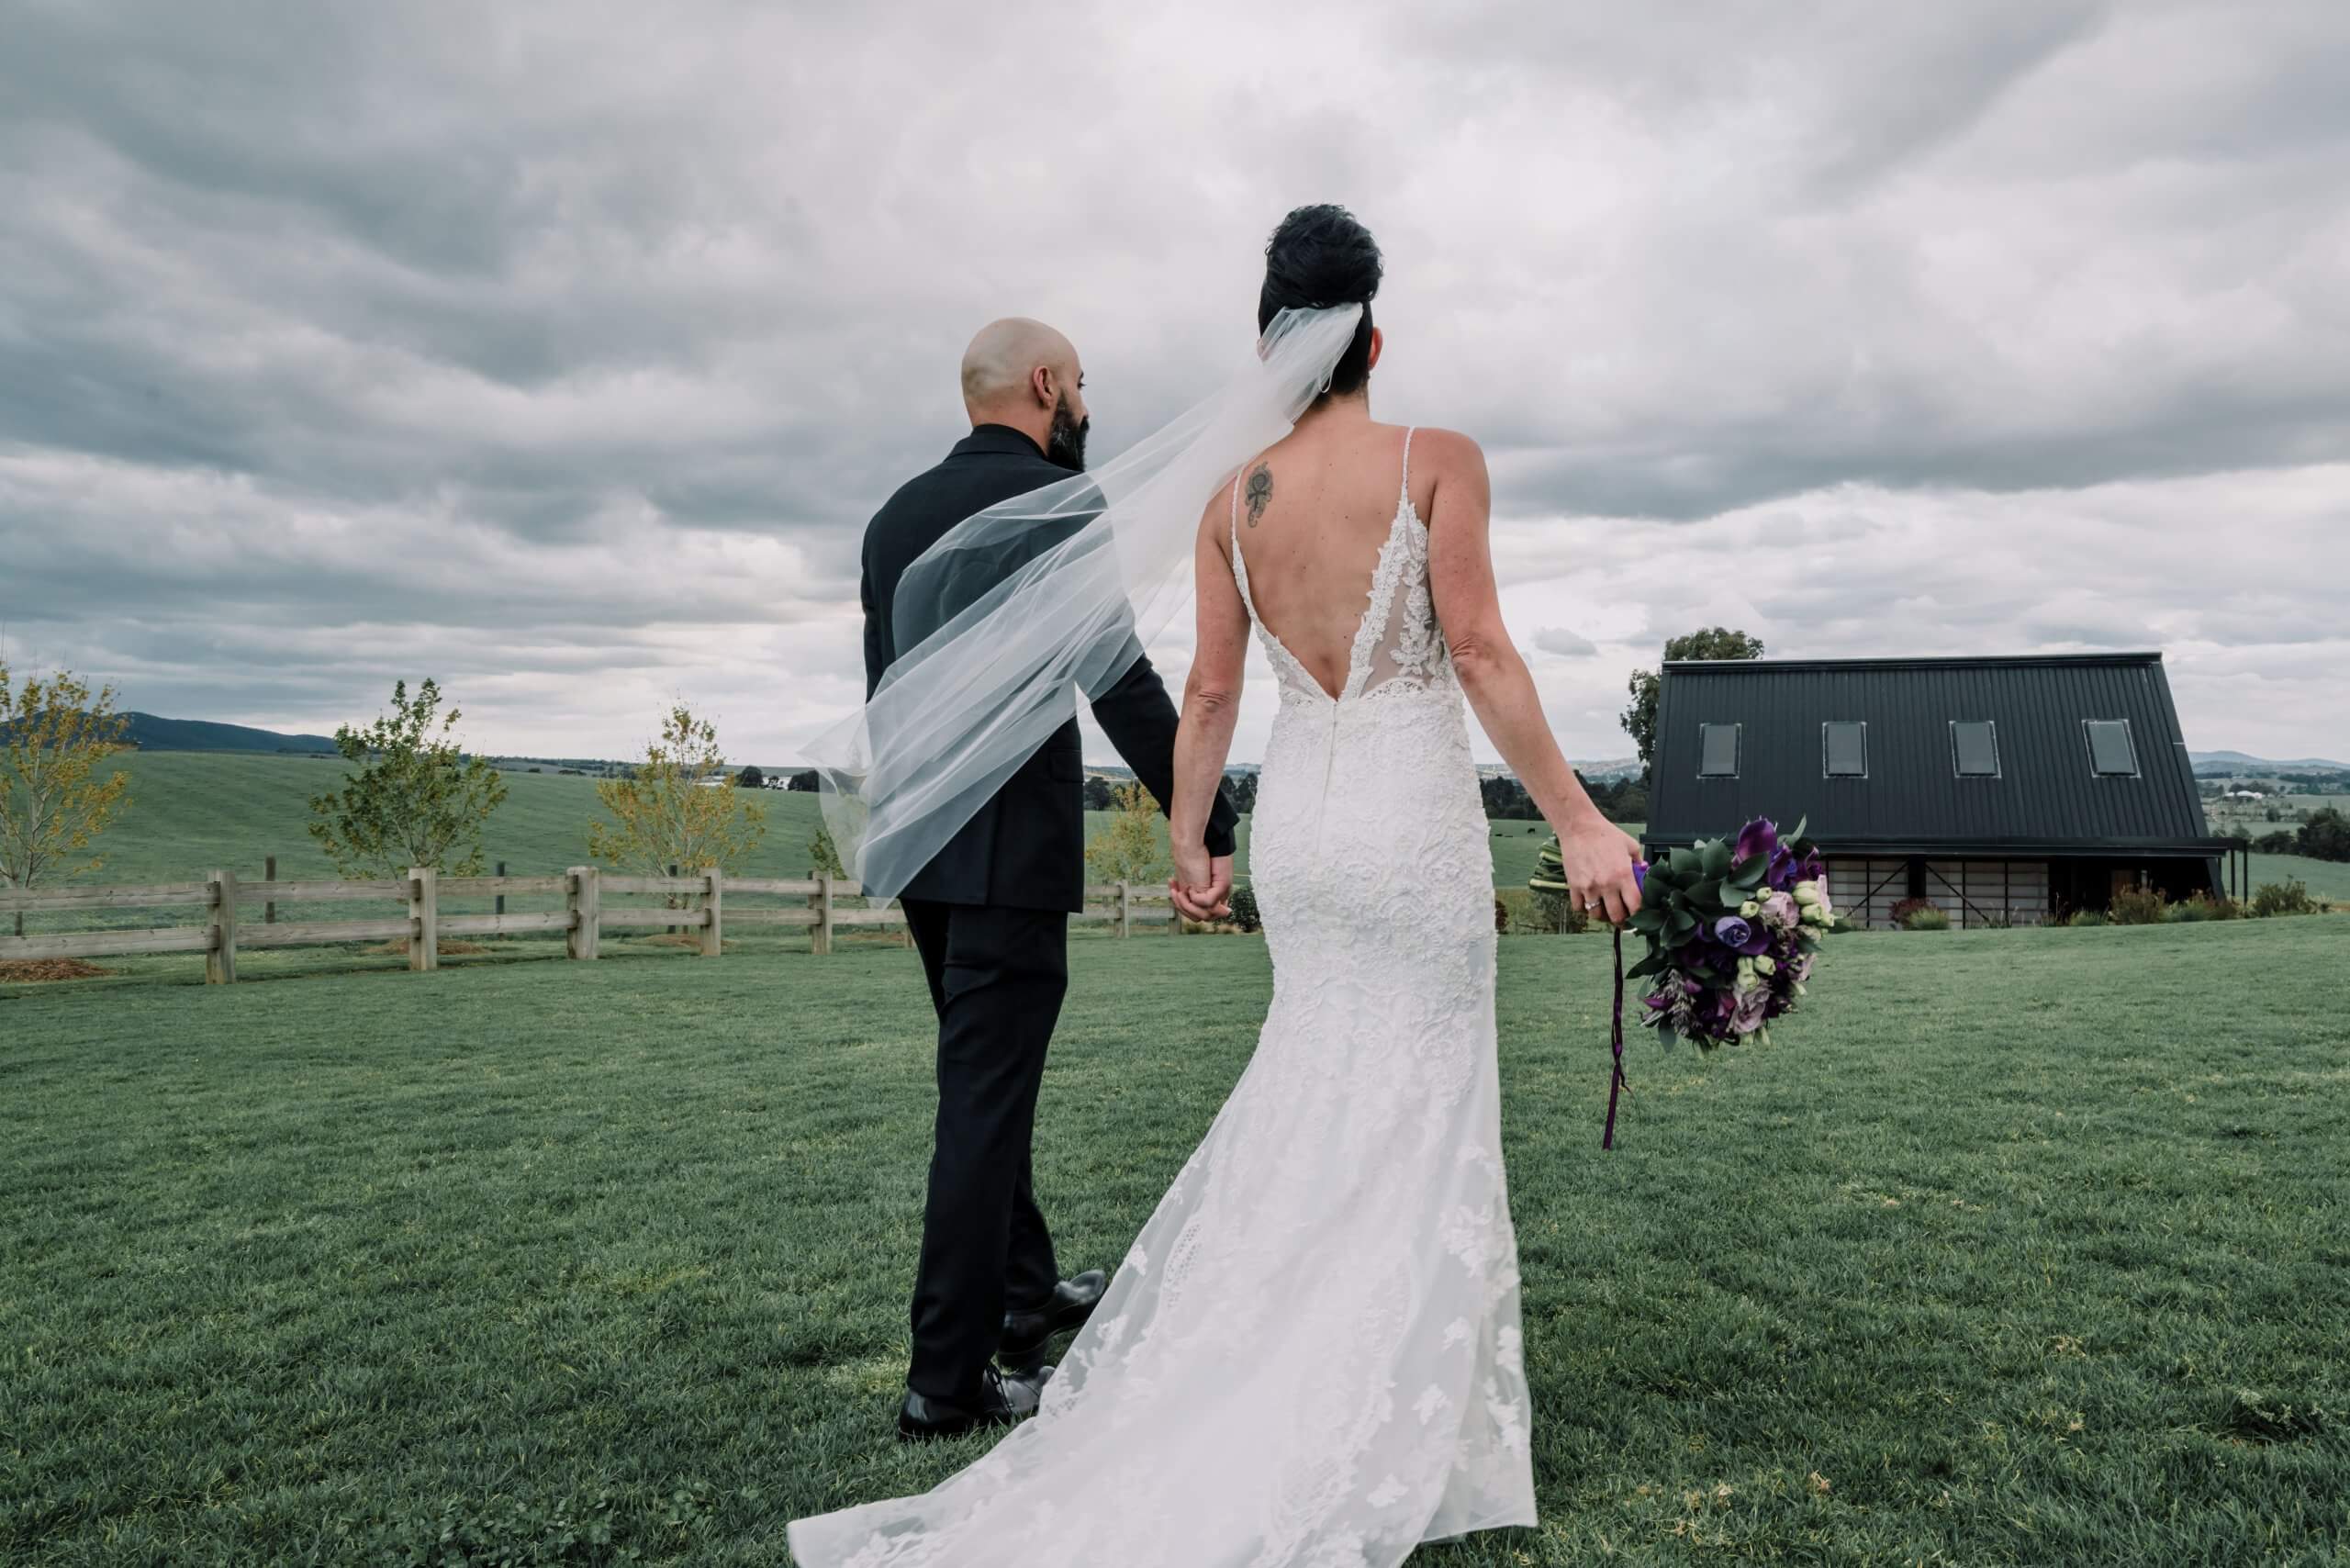 Dramatic back view of the bride and groom walking in the farmlands.